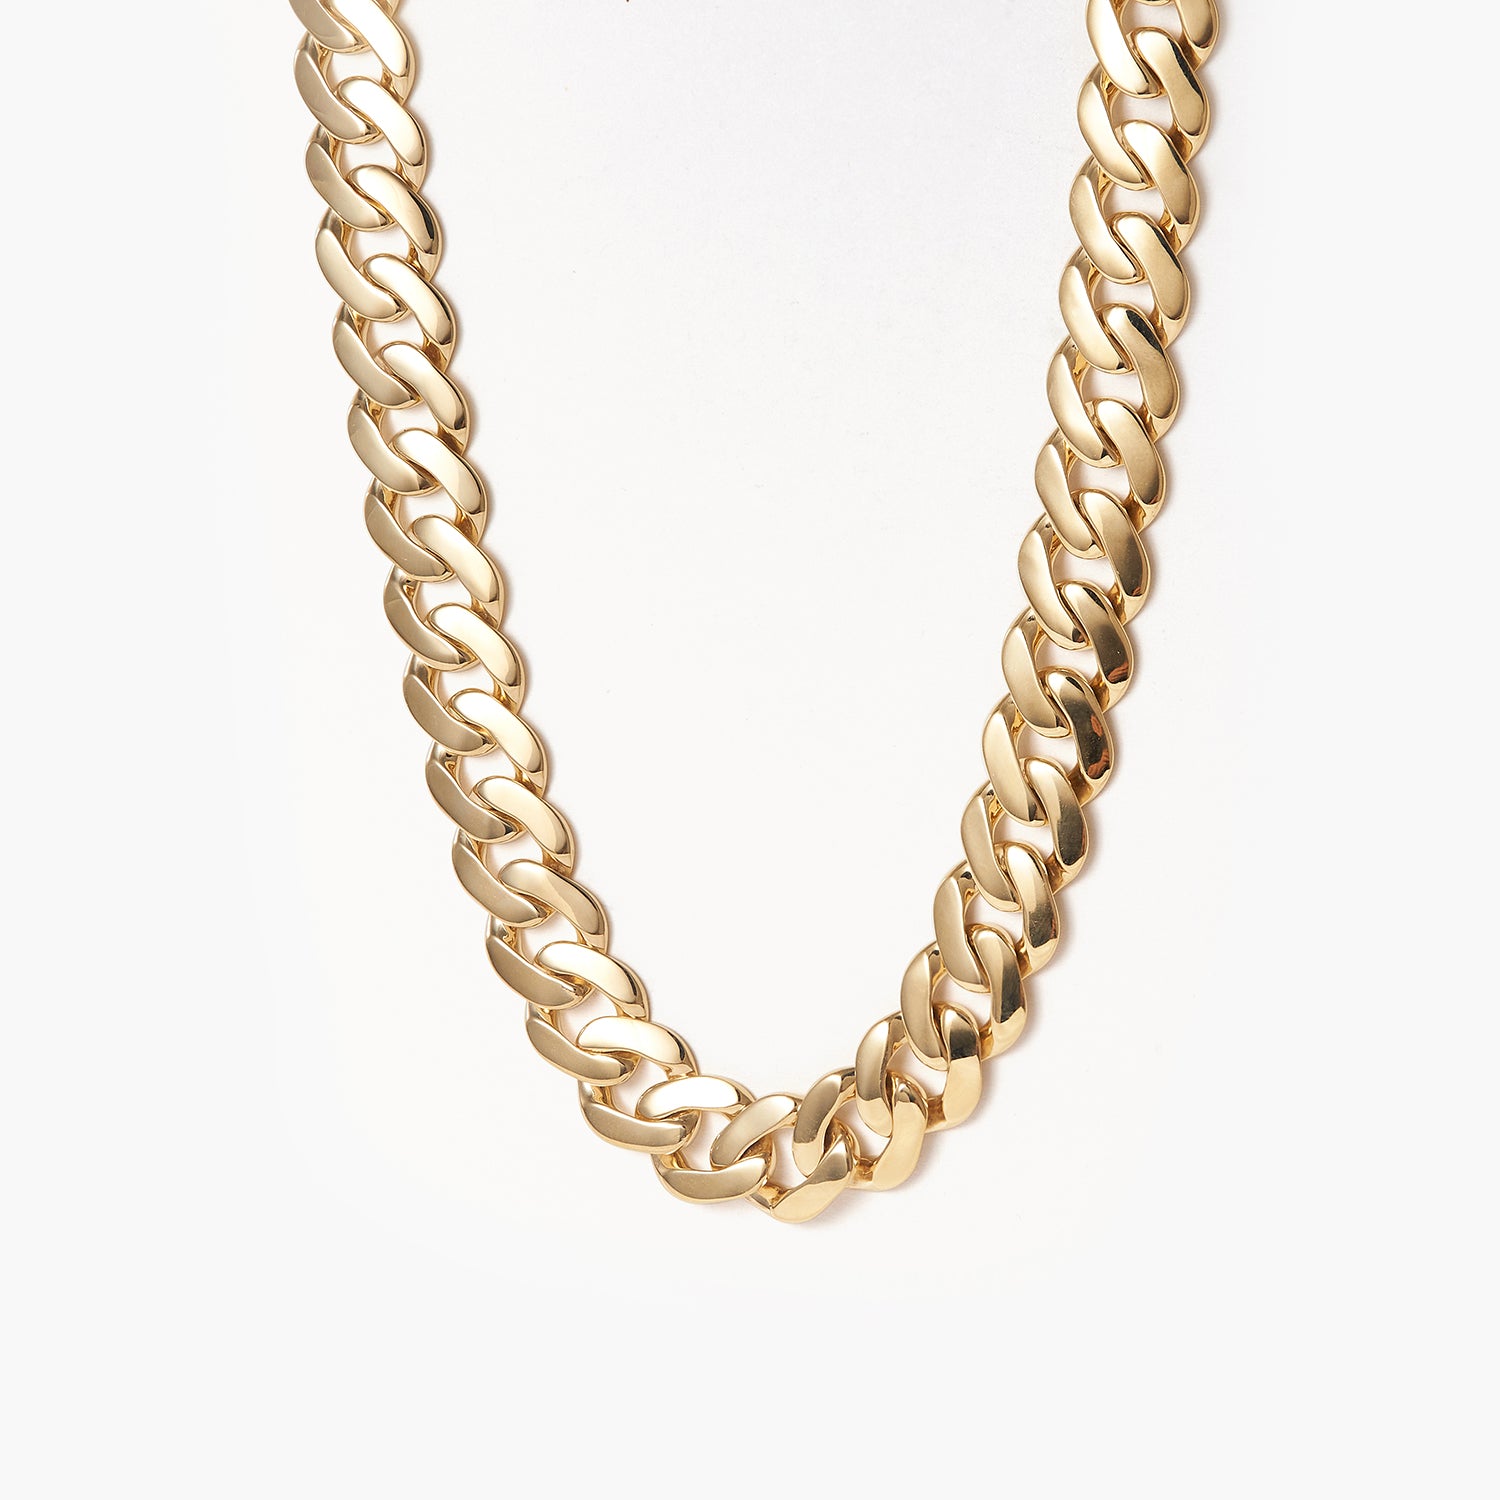 14K Super Solid Heavy Gold 10MM Miami Cuban Link With Diamonds Chain Necklace